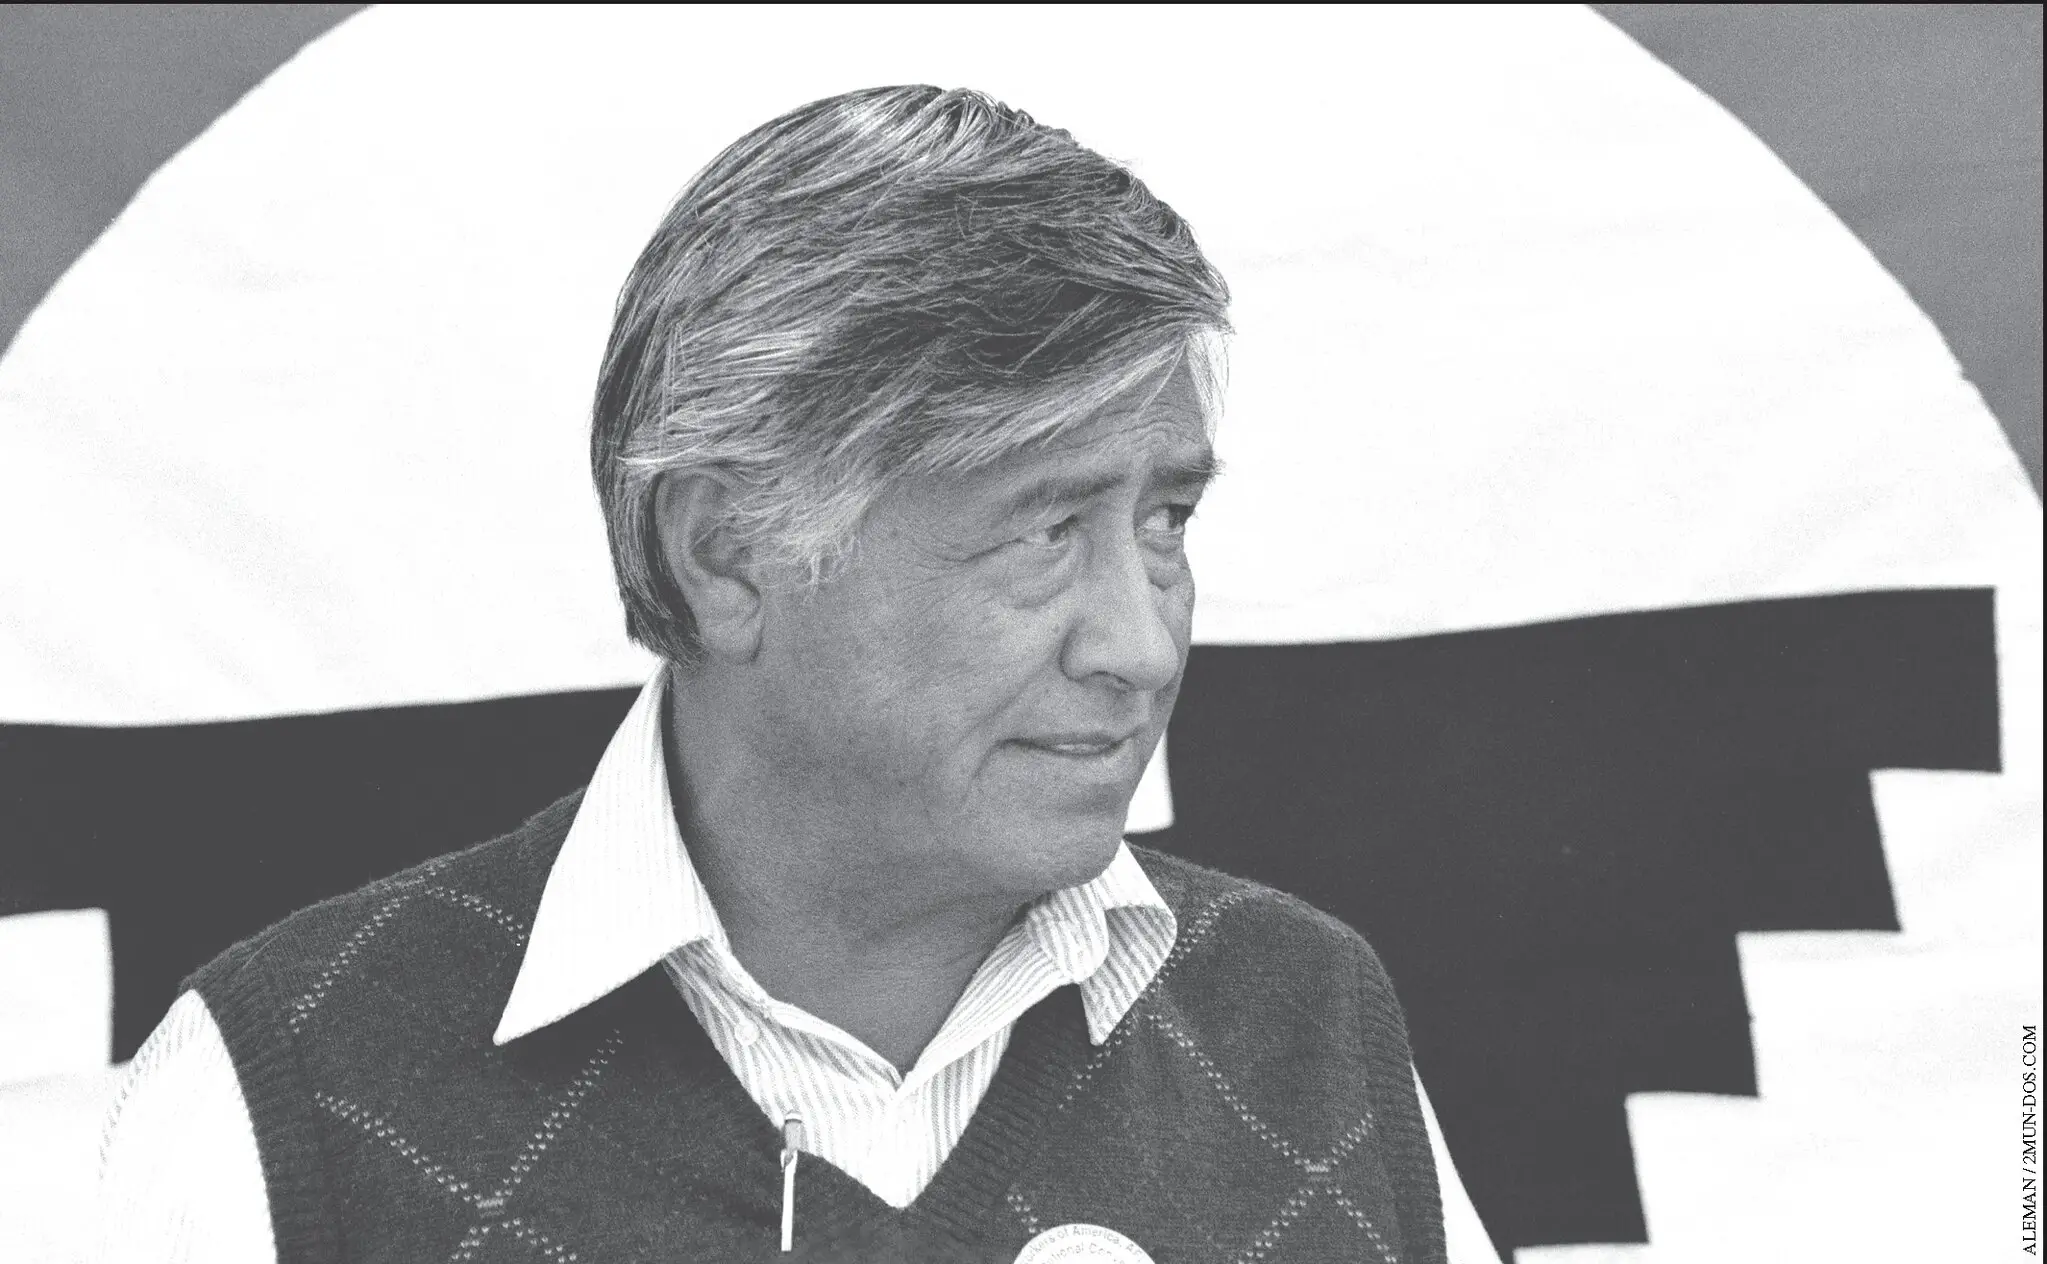 35 Powerful Cesar Chavez Quotes On Education, Civil Rights & More